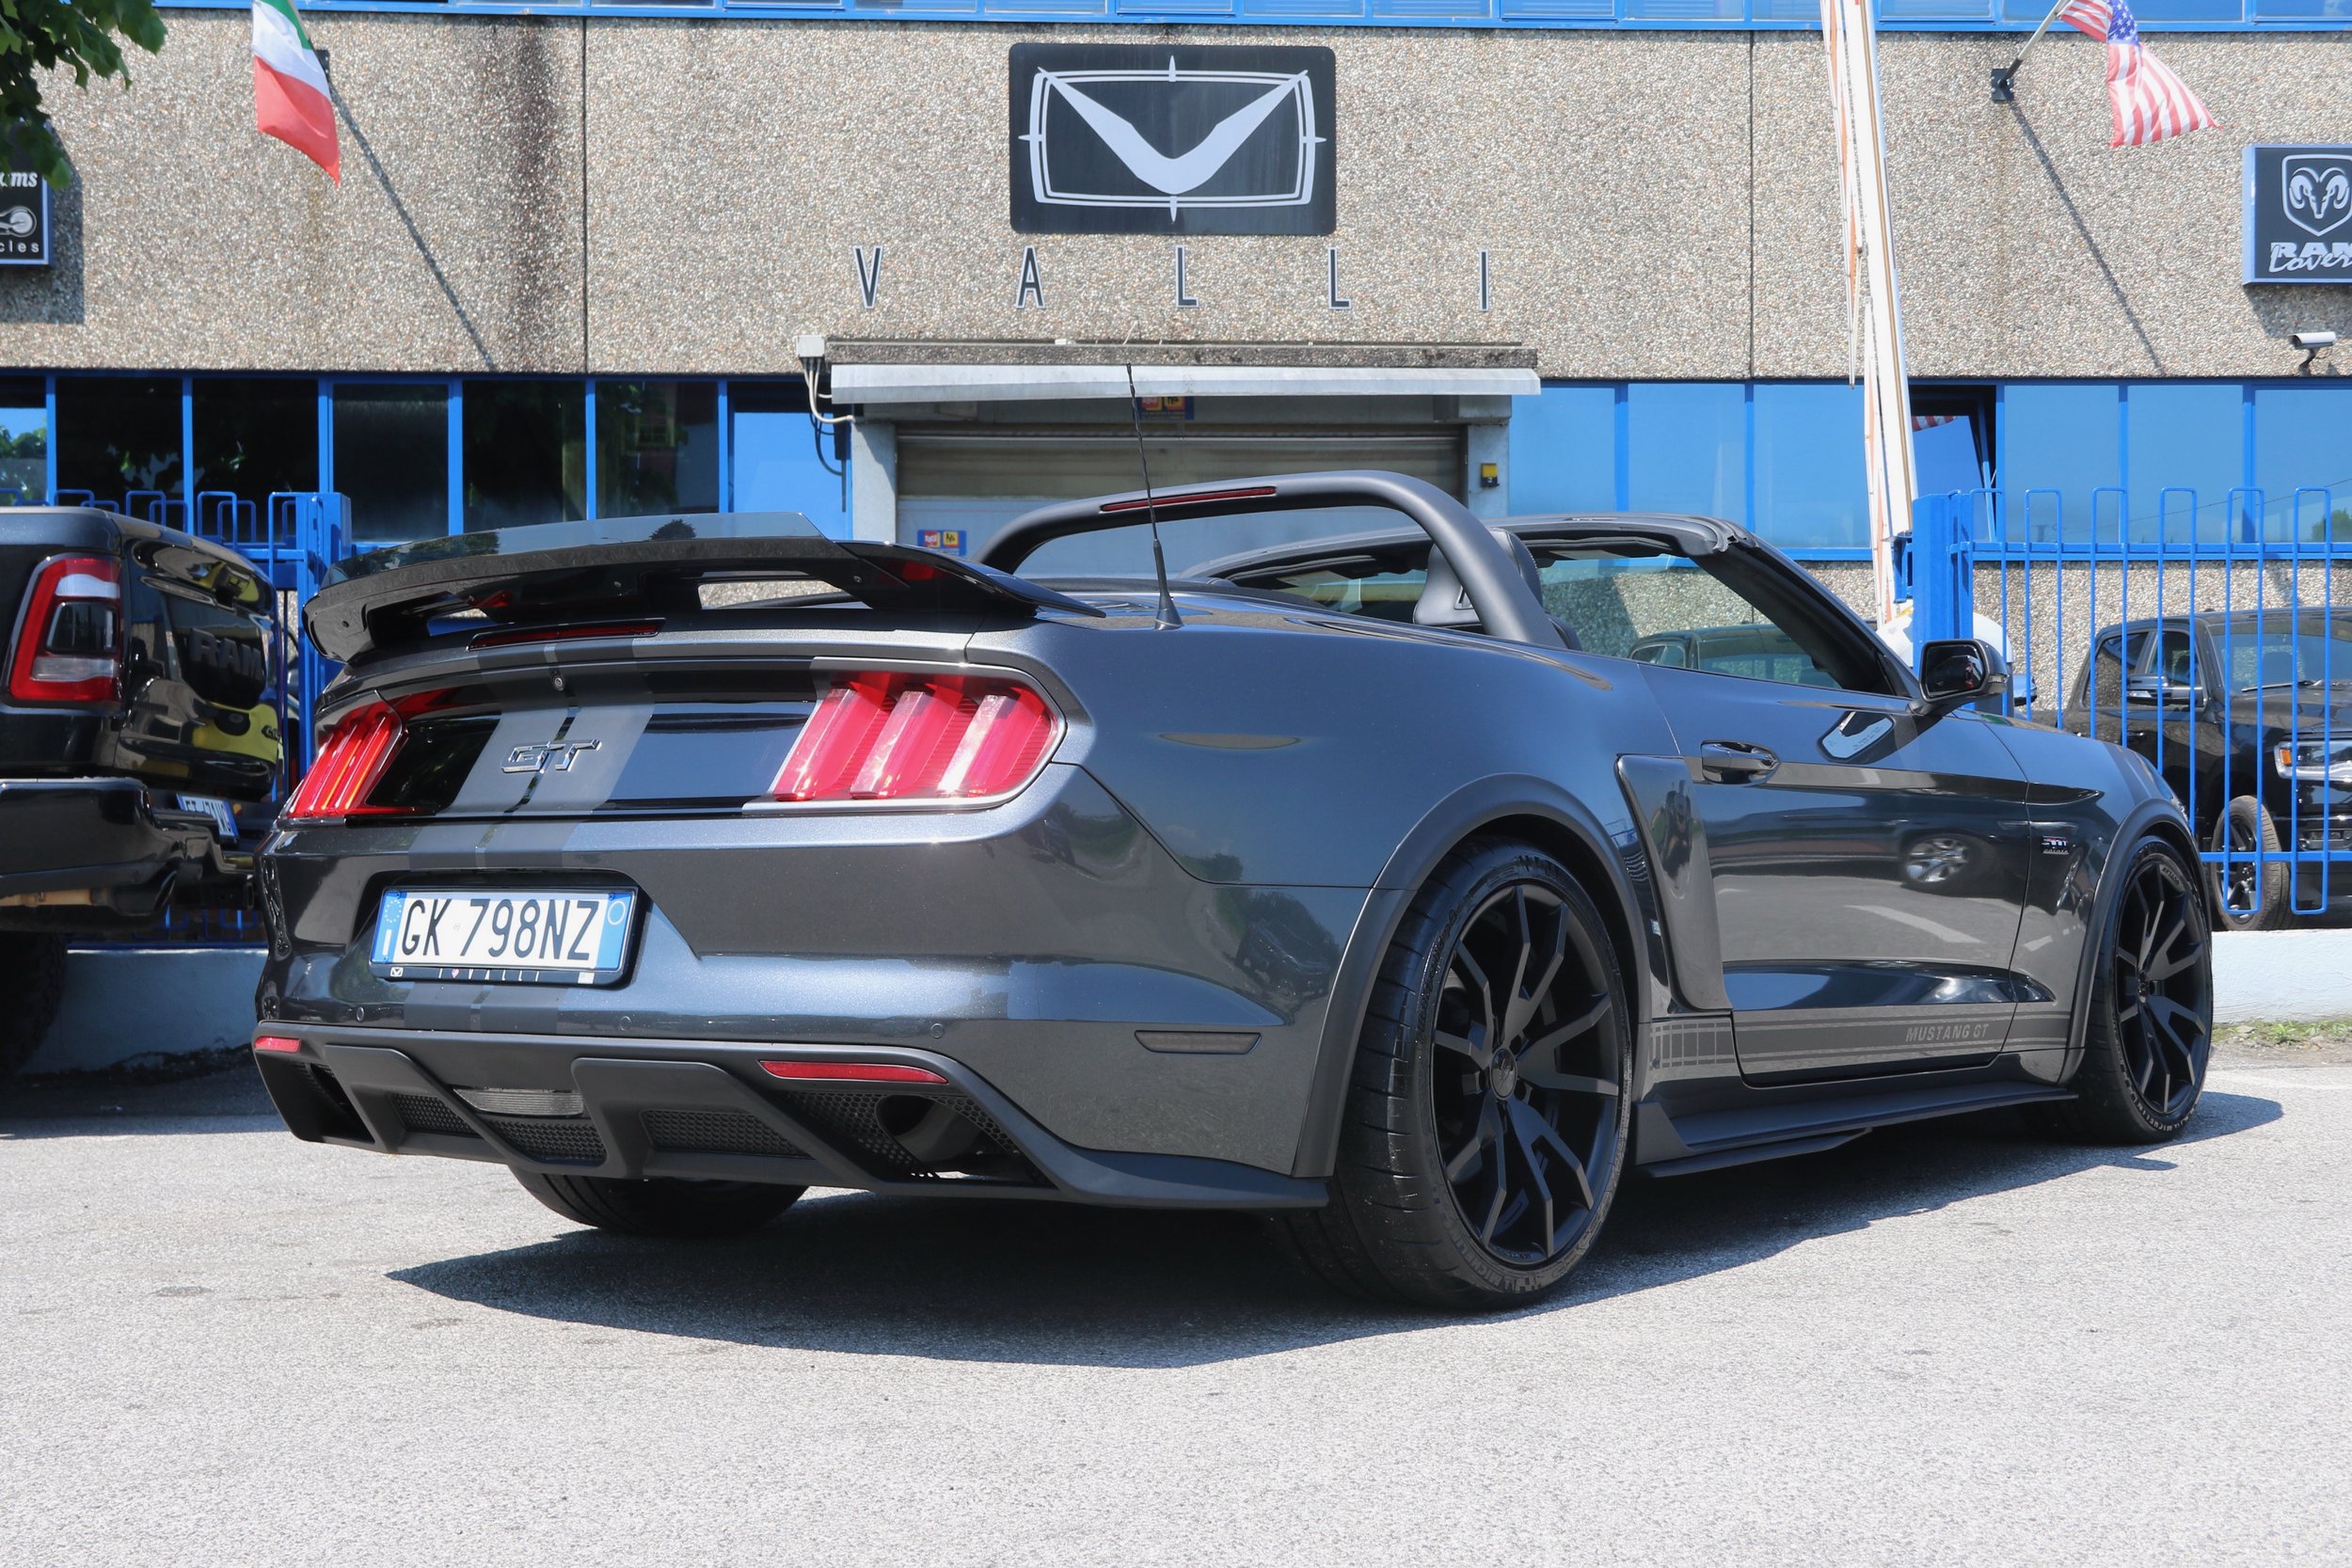 04 2015 Mustang GT 5.0L Coyote Convertible Marco Vignale.jpeg